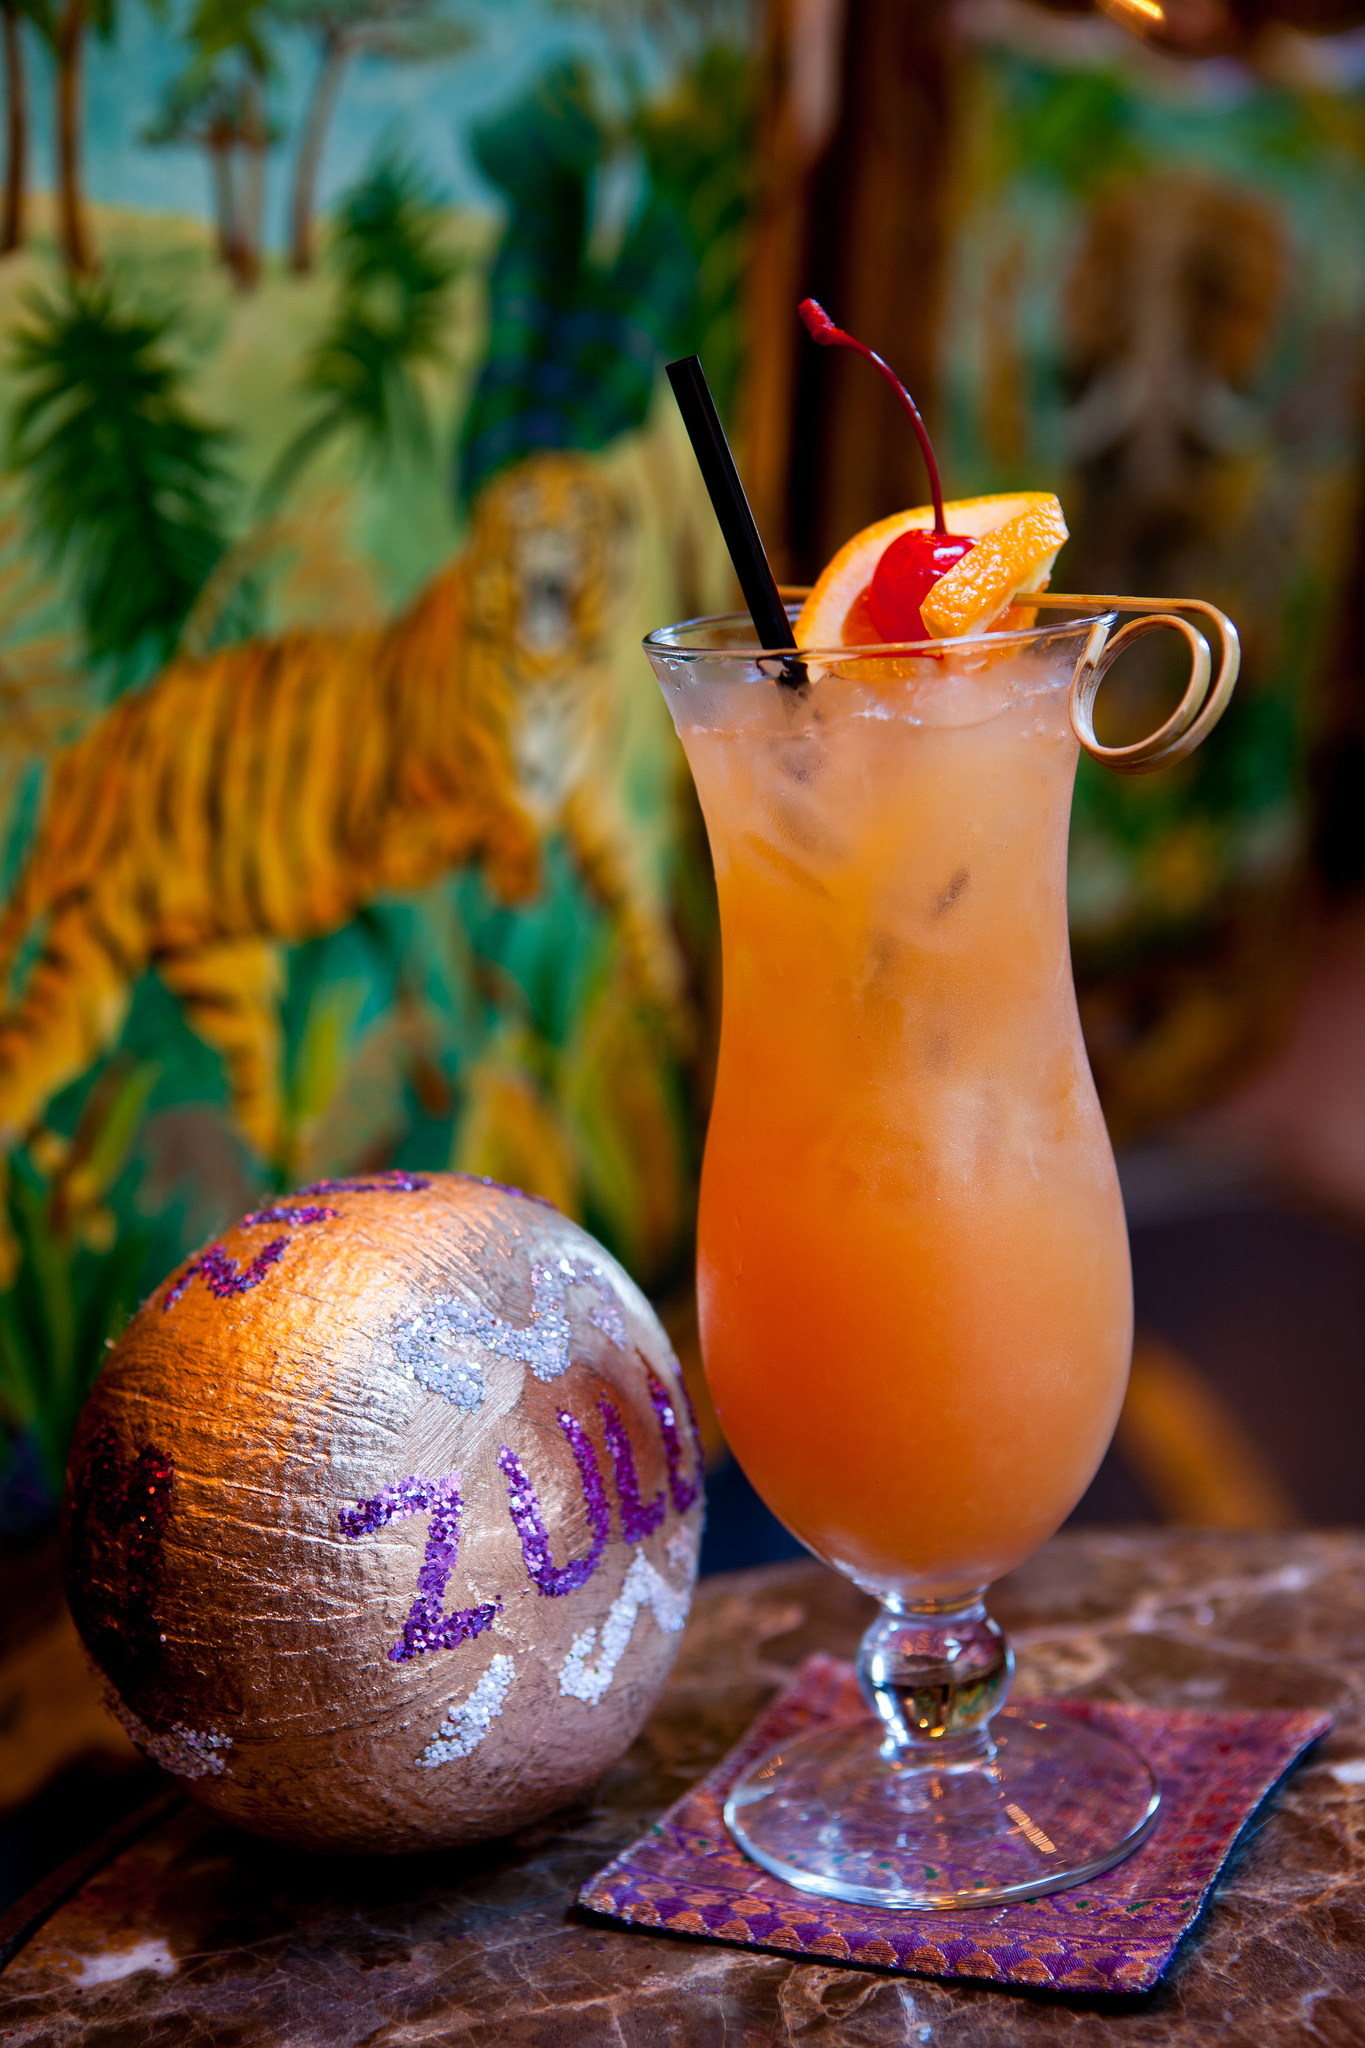 This tropical coconut punch is inspired by the world-famous Zulu Social Aid & Pleasure Club, who parade every Mardi Gras.